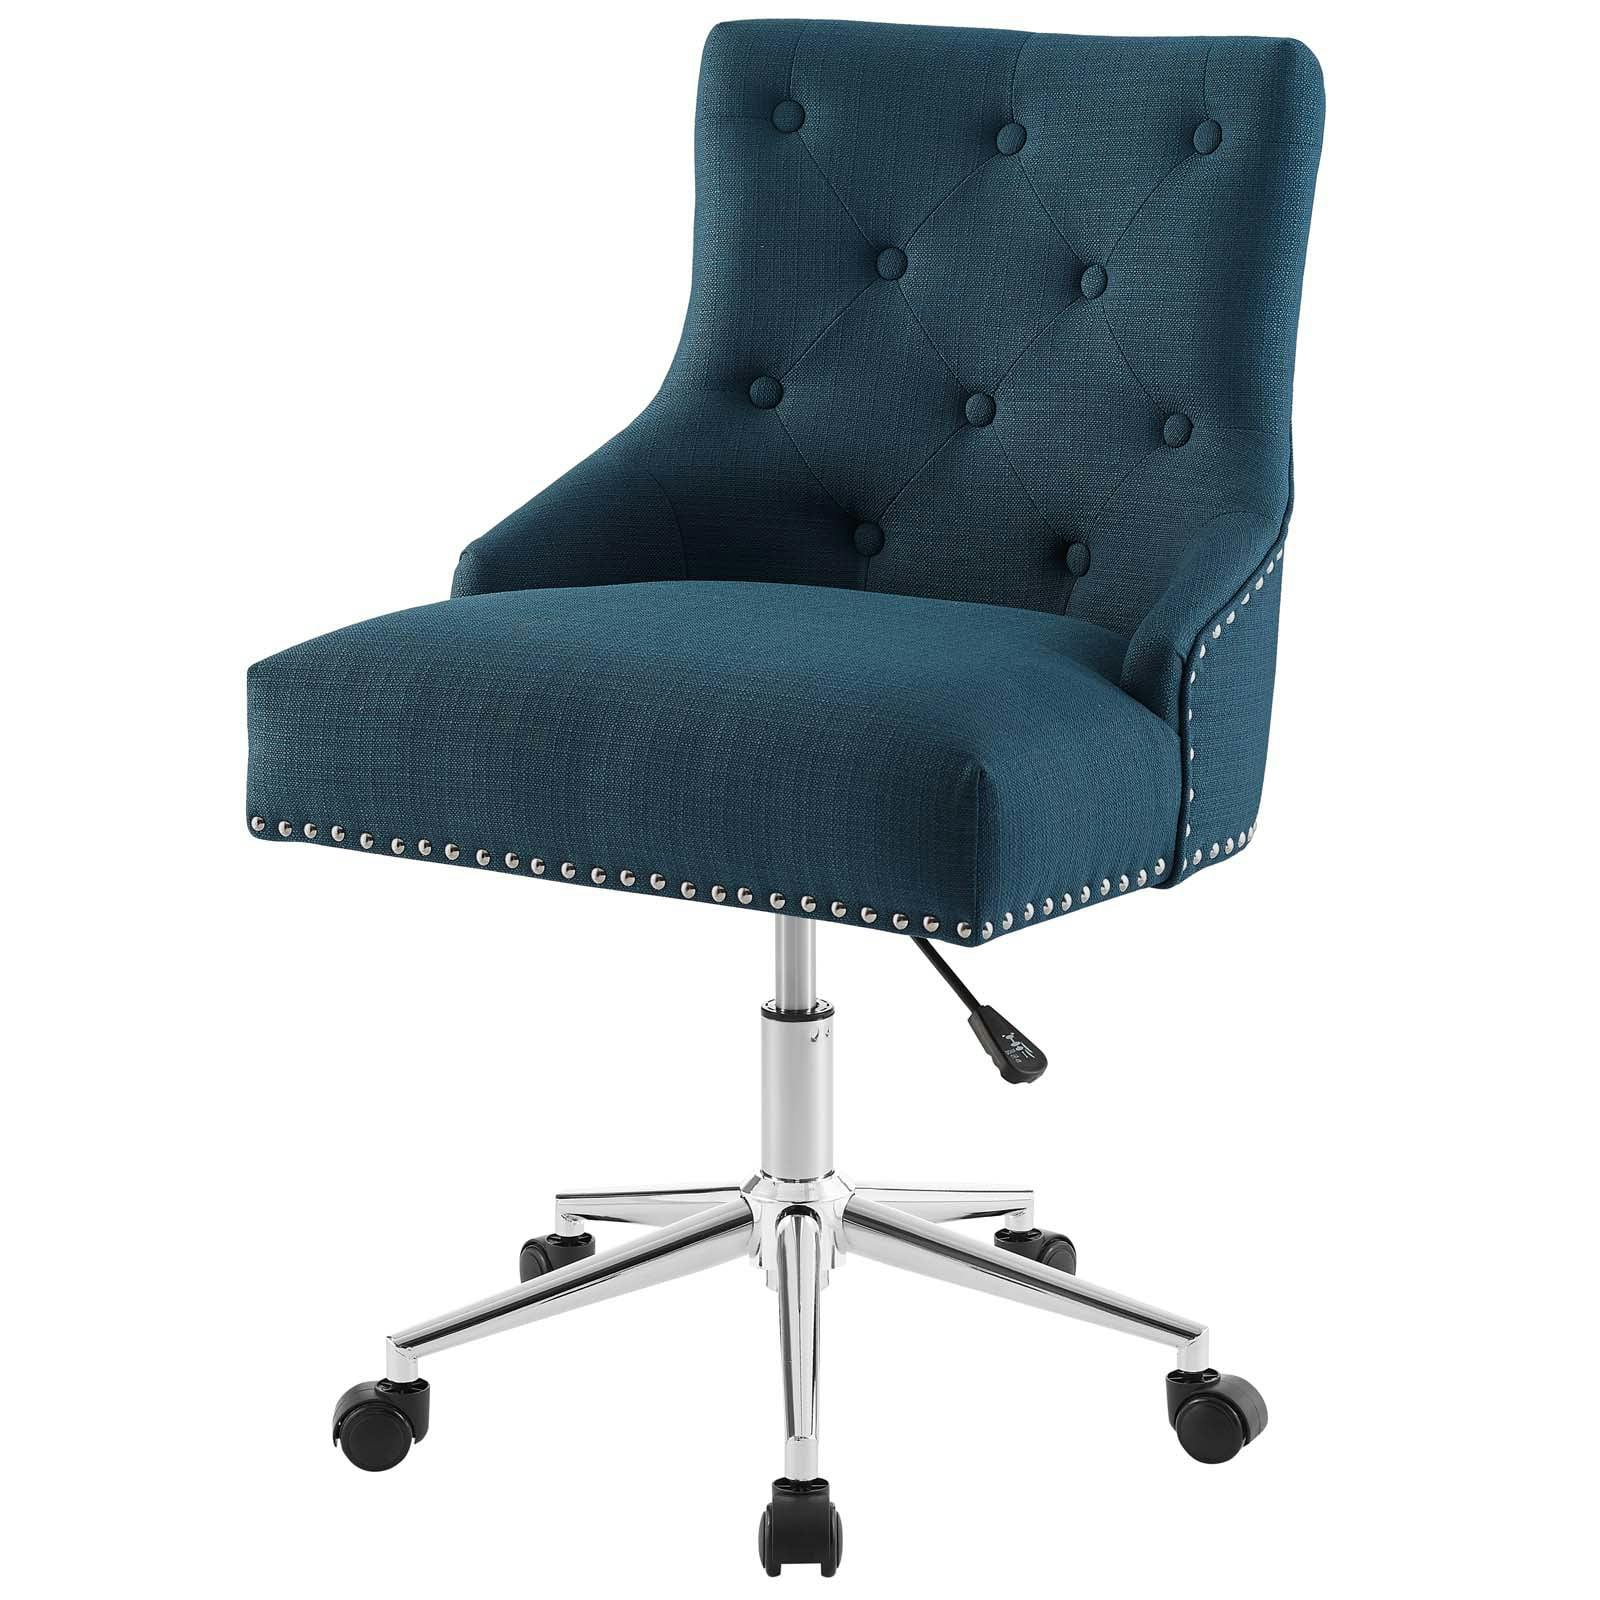 Azure Elegance Tufted Swivel Office Chair with Nailhead Trim